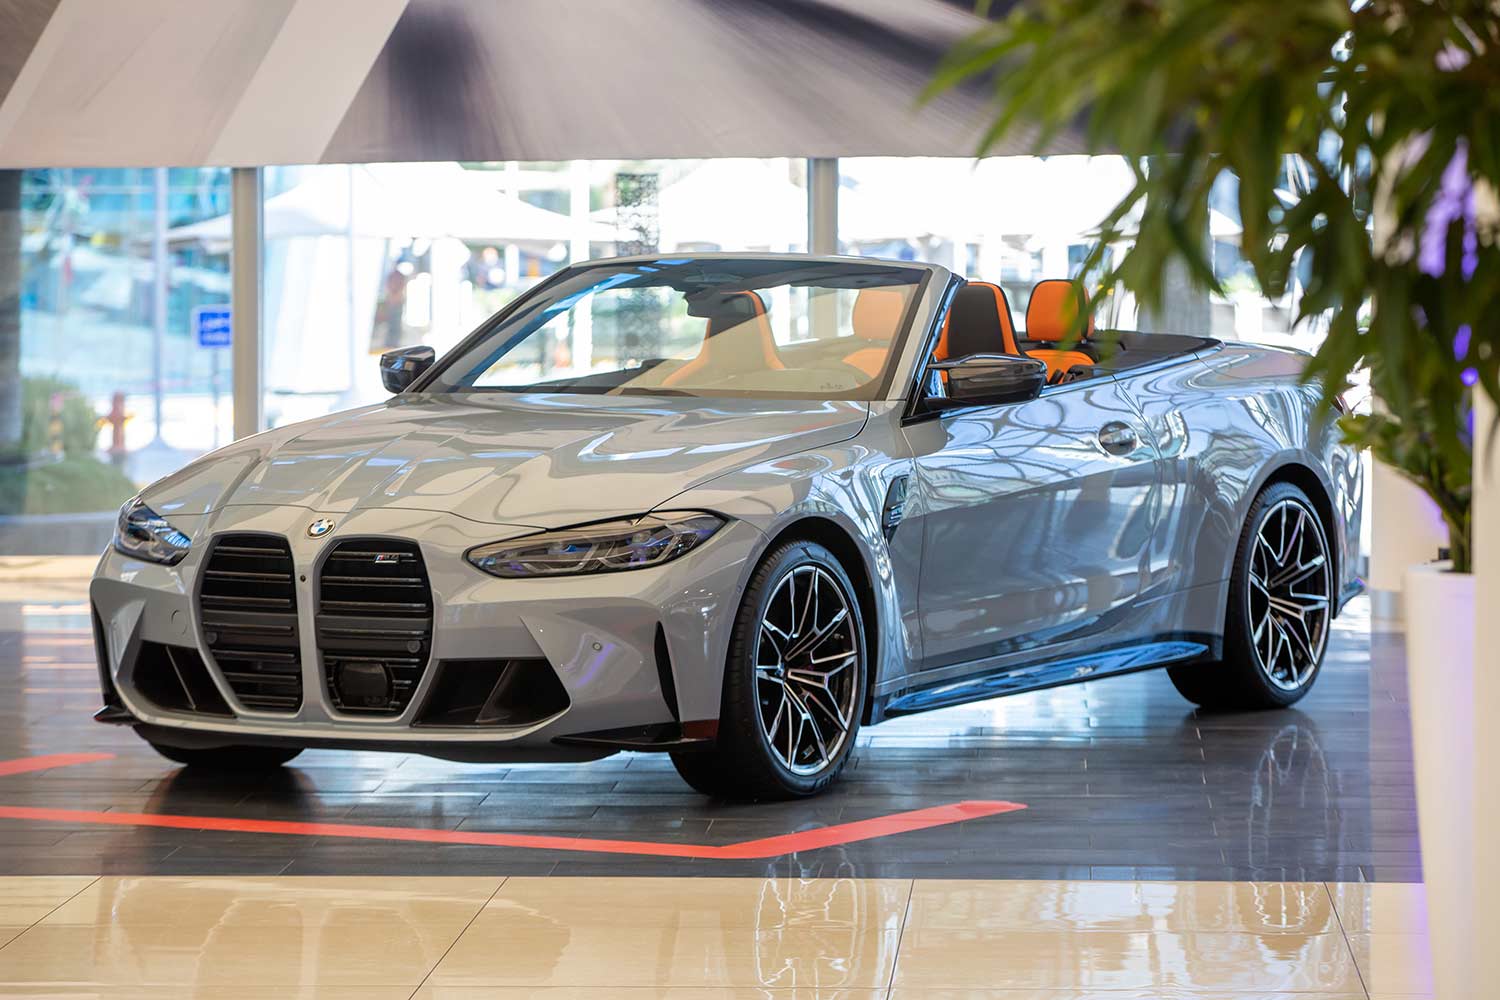 Alfardan Automobiles announces the arrival of all-new BMW 2 Series Coupe, BMW 4 Series Gran Coupe, BMW M4 Convertible and debuts the M2 CS Racing Safety Car